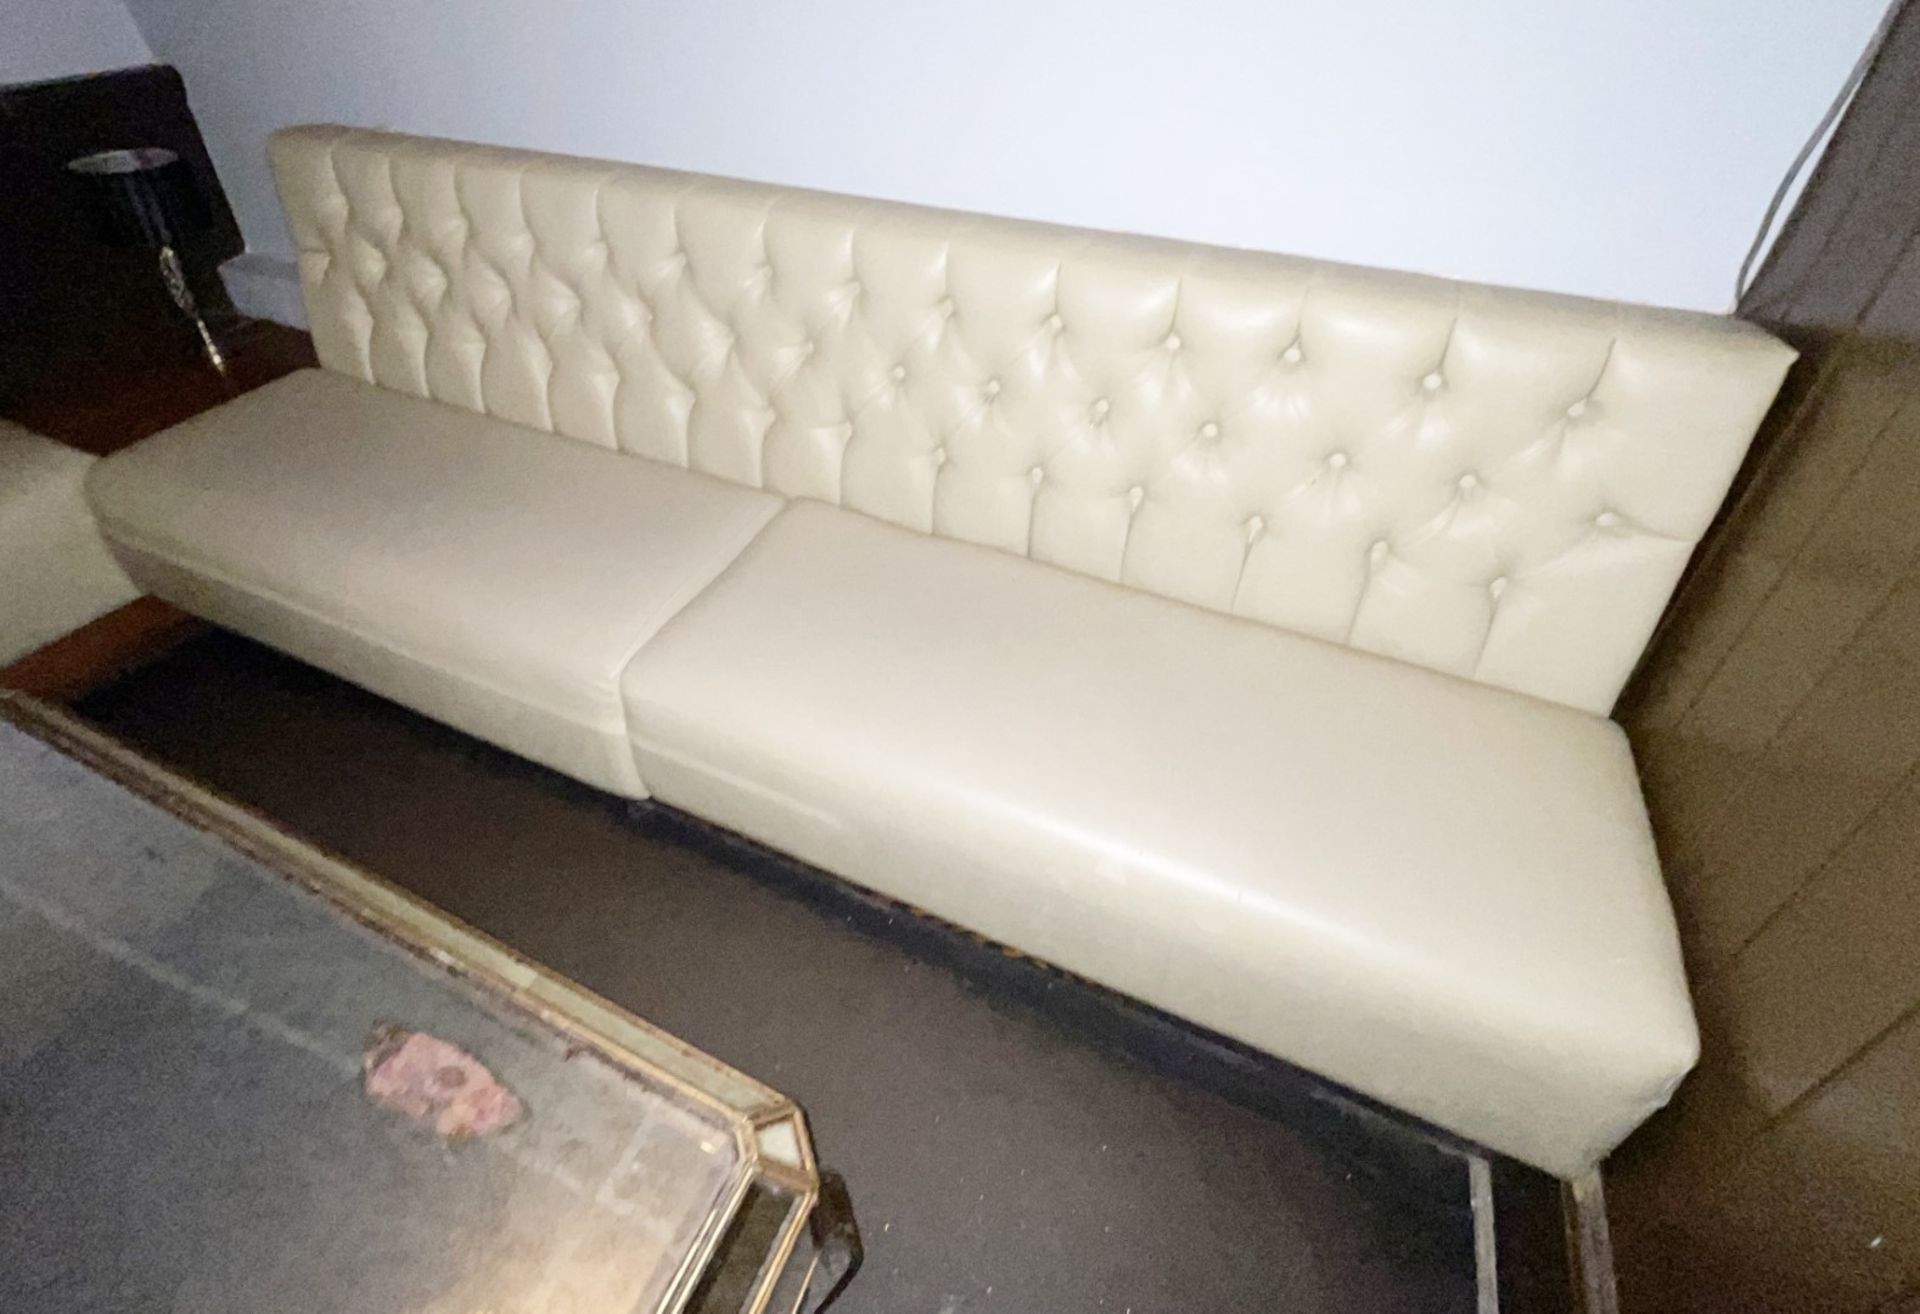 5 x Sections of Commercial Button Back Banquette Booth Seating Upholstered in a Cream Faux Leather - Image 6 of 14